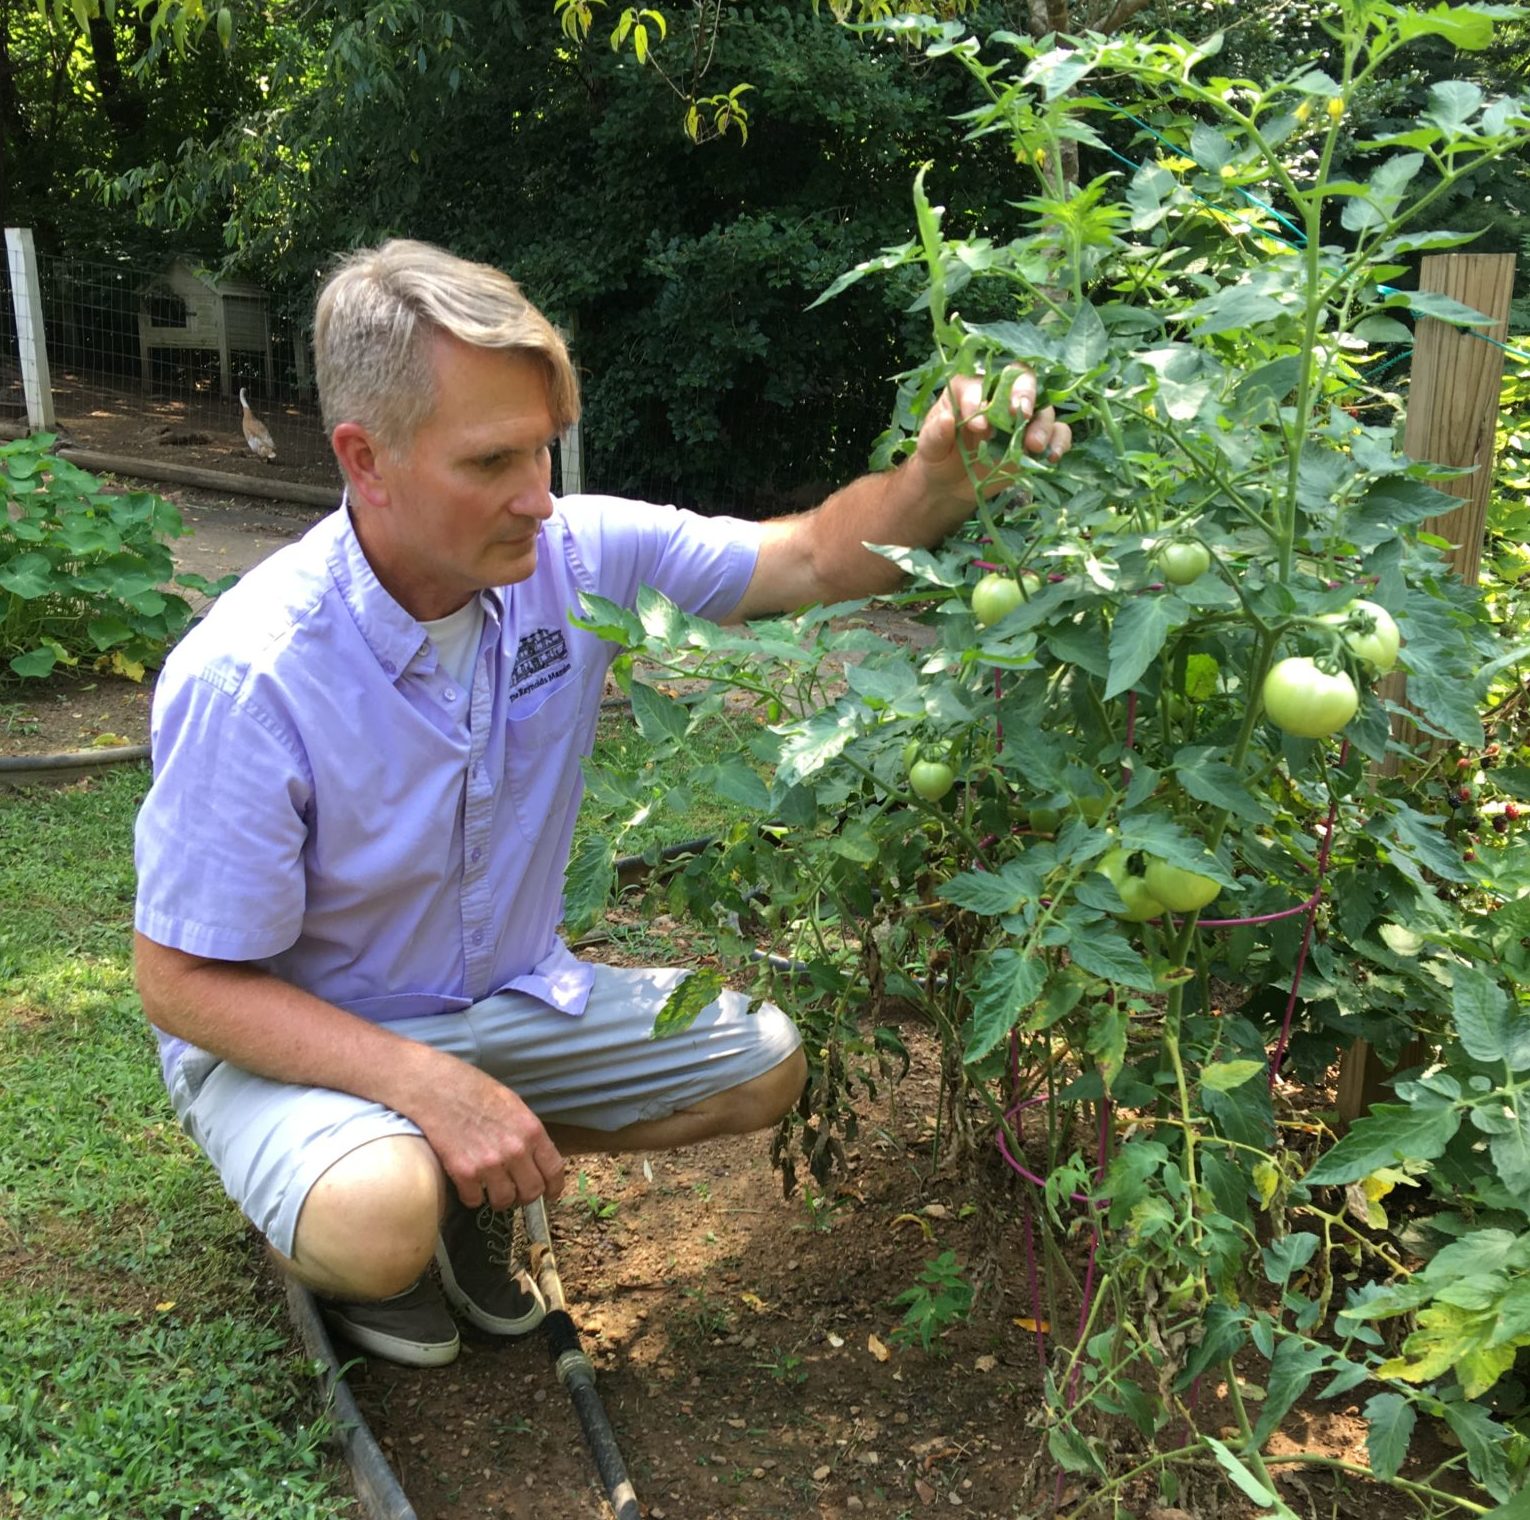 Man looking at tomato plant